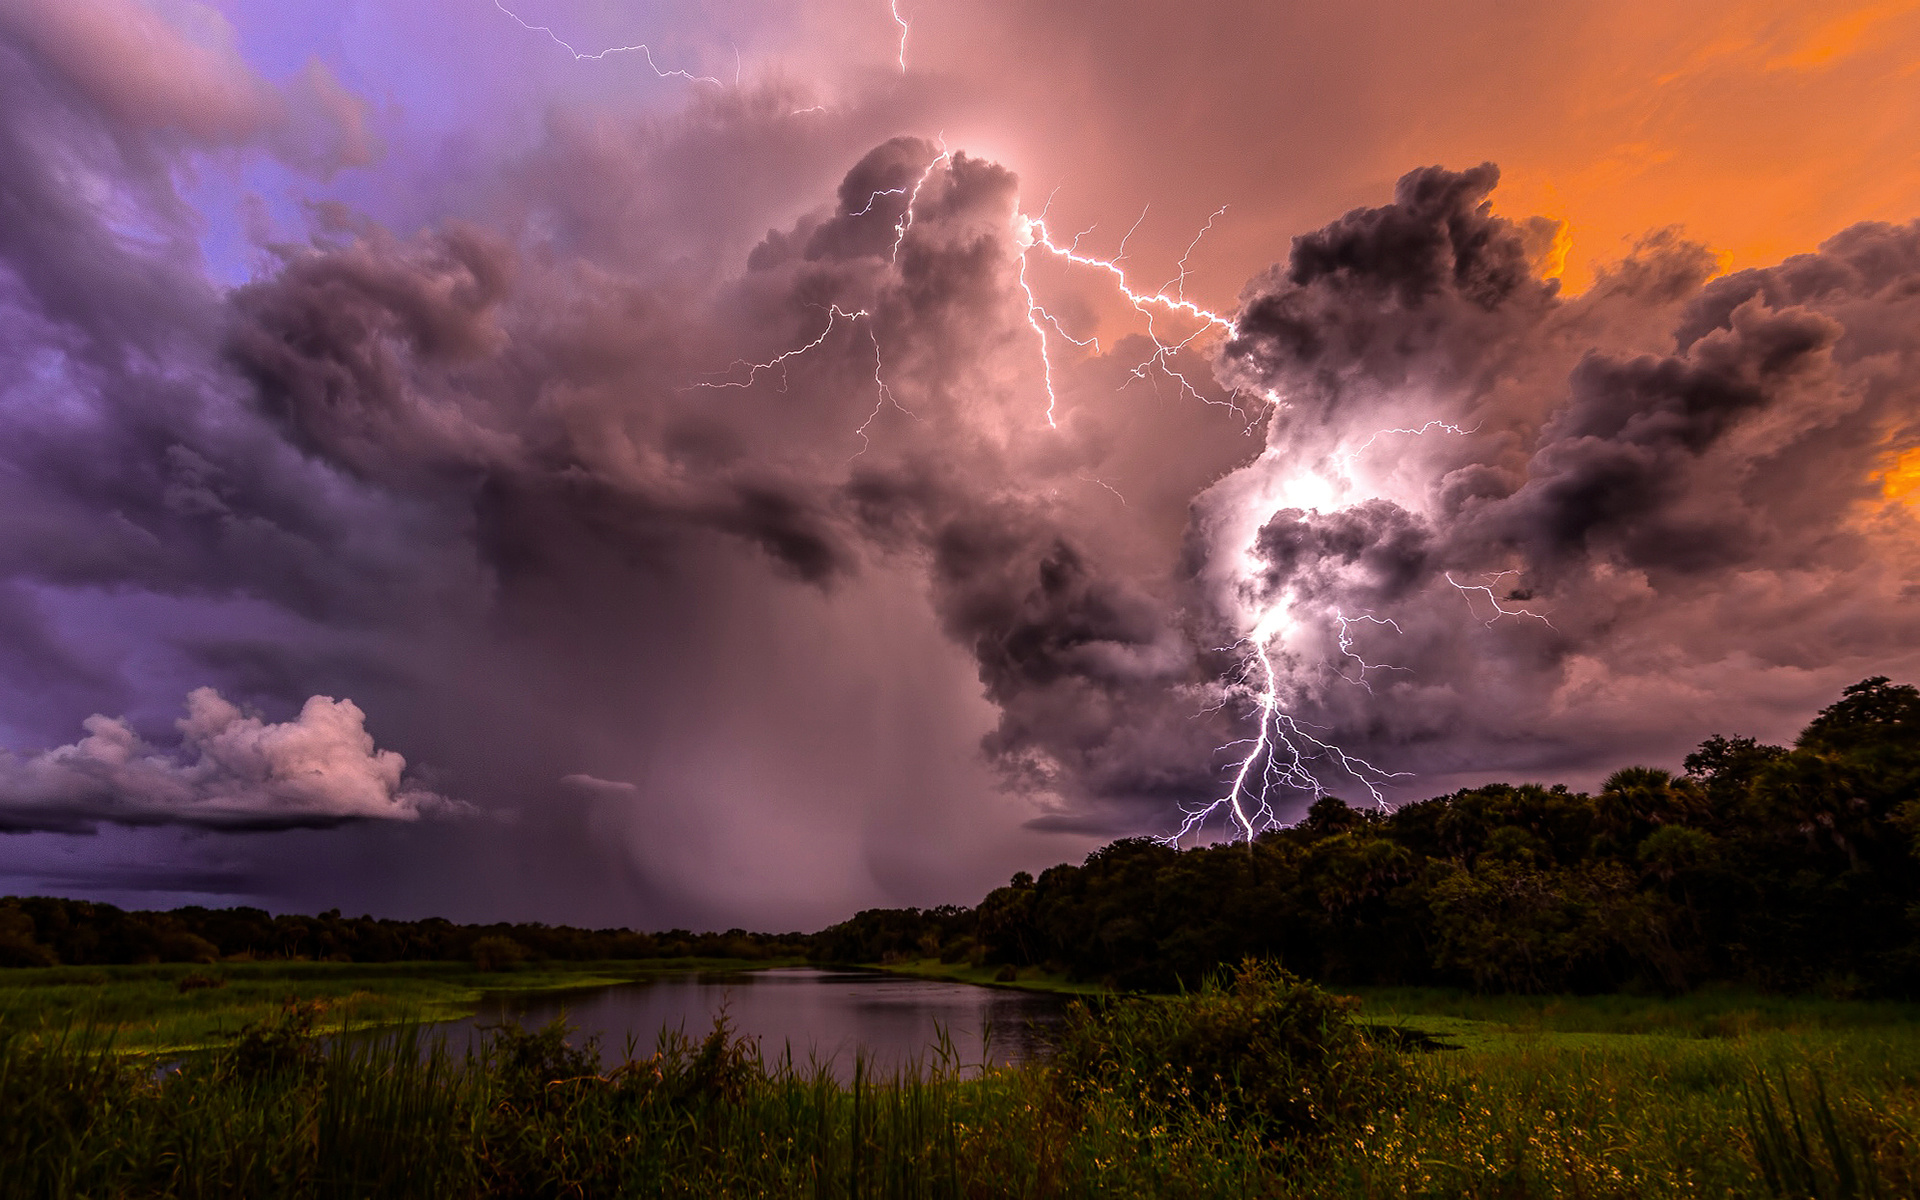 Storm Clouds and Lightning by Justin Battles